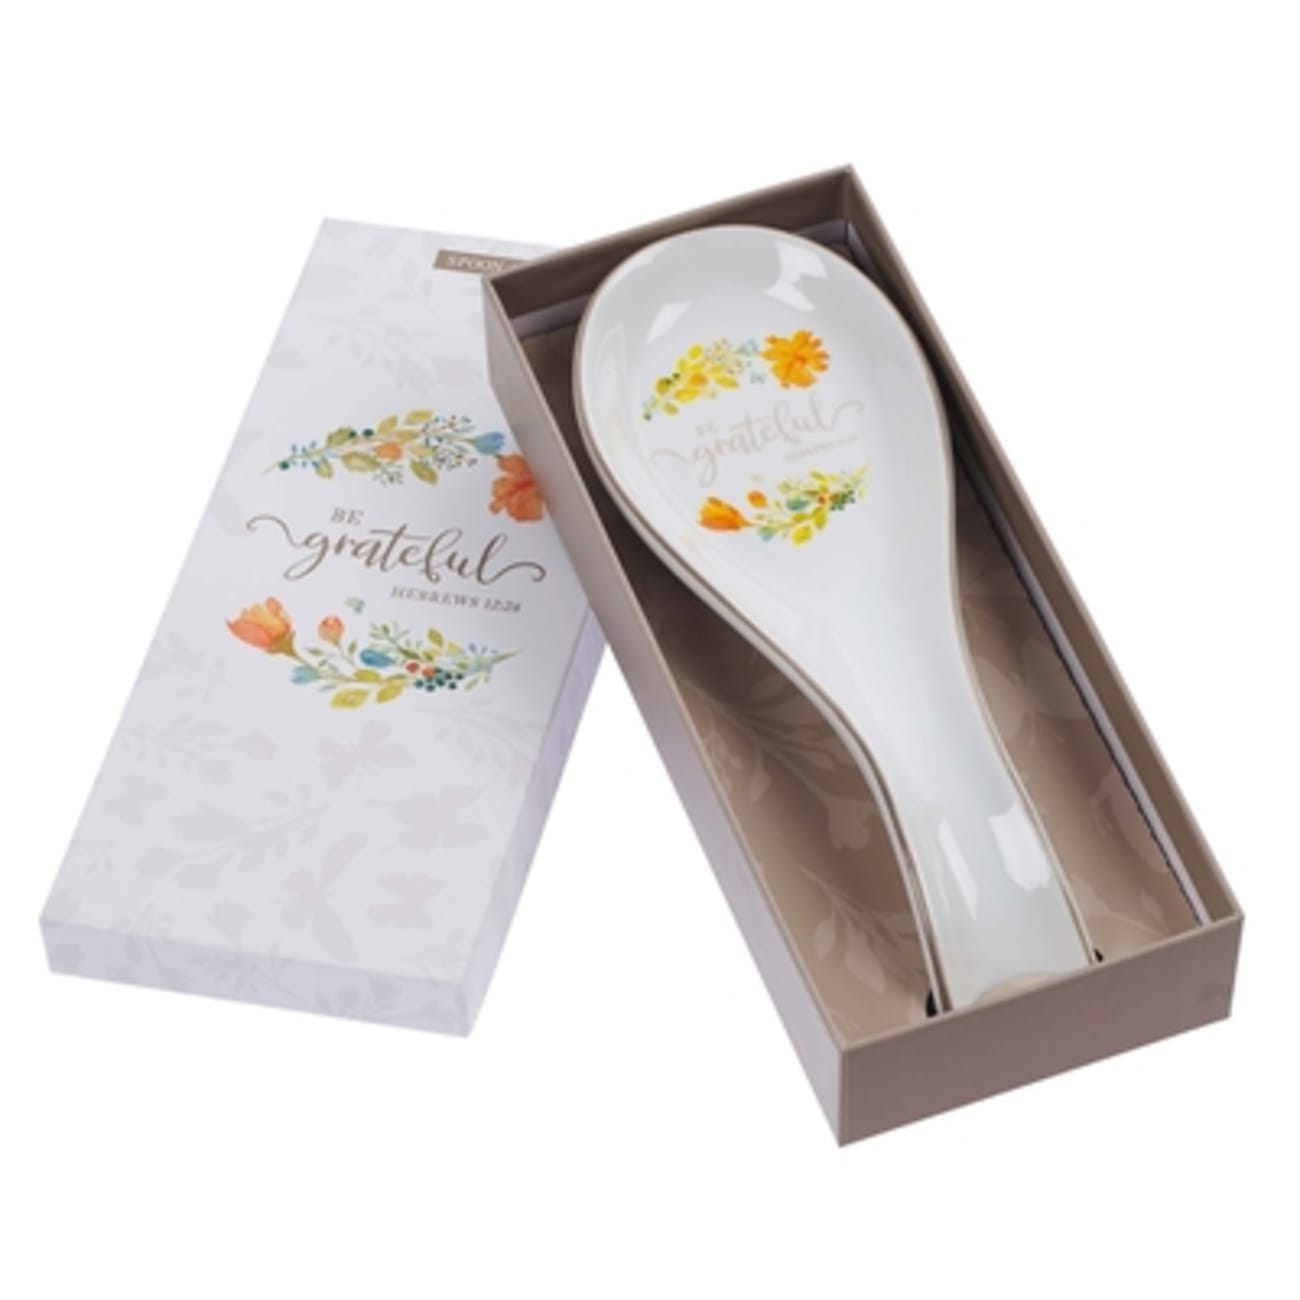 Ceramic Spoon Rest- Be Grateful, White With Border and Flowers (Grateful Collection) Homeware